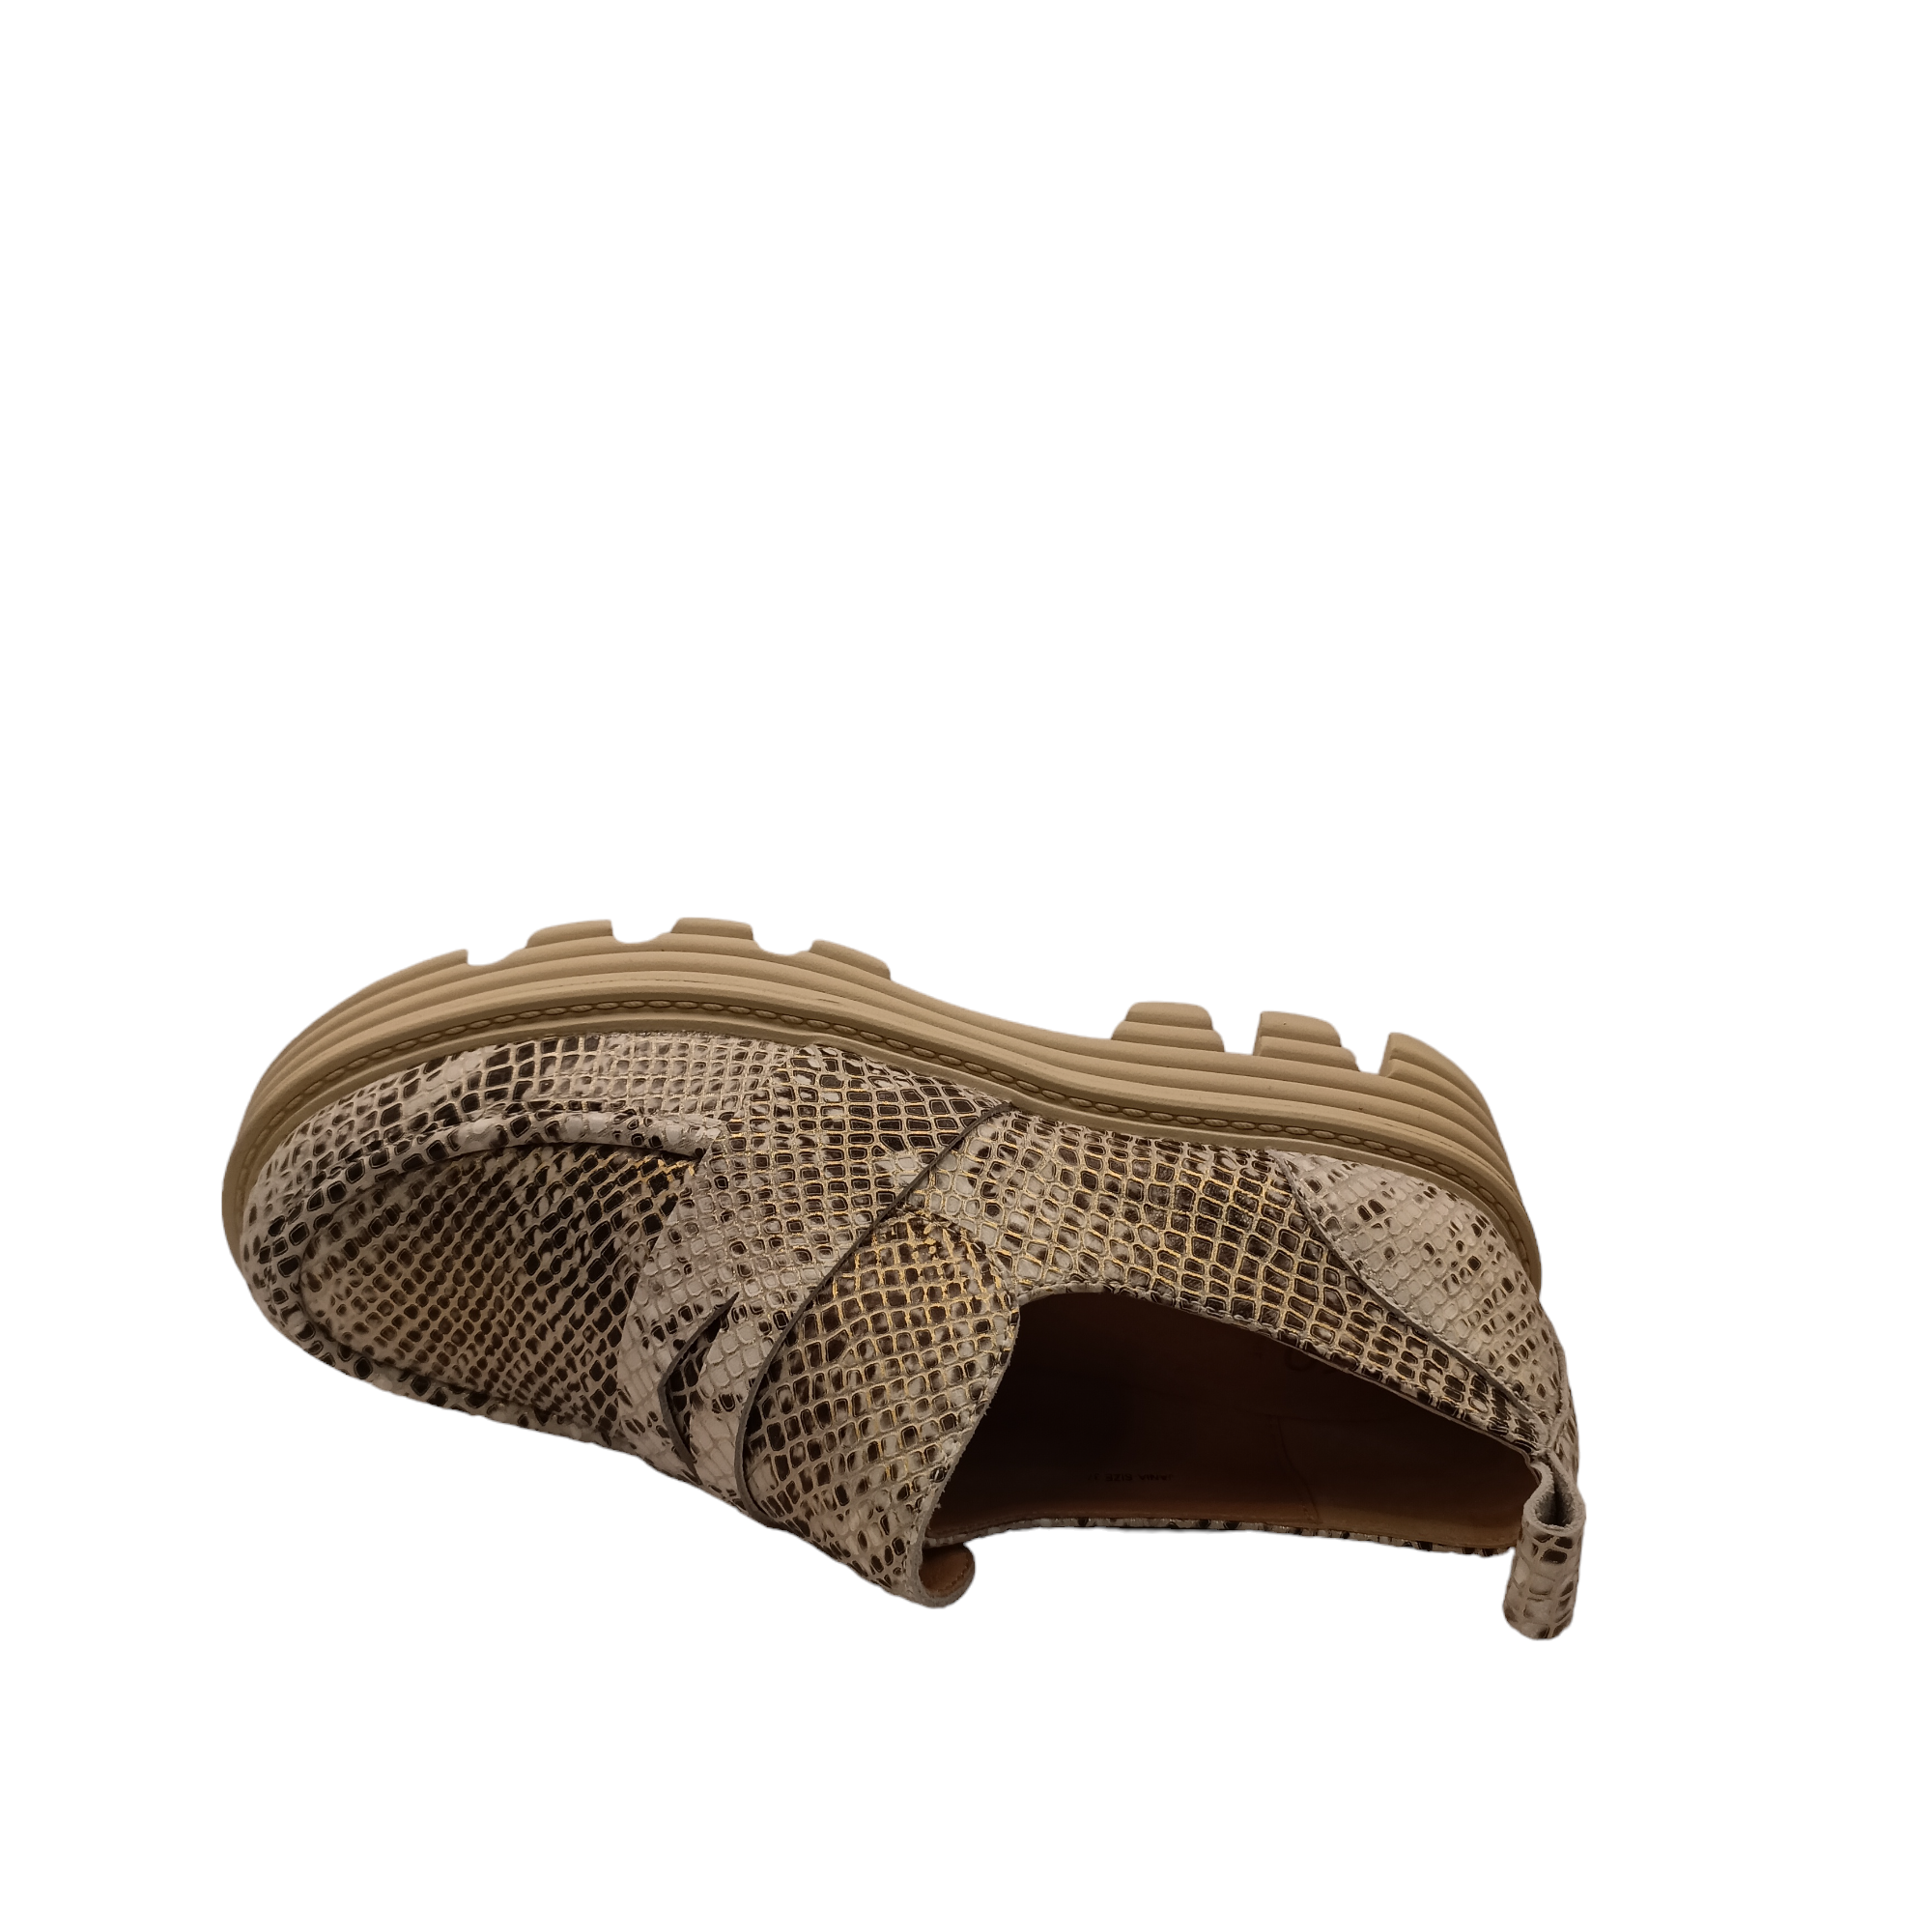 Top view of Jania, Slip on shoe from EOS. Champagne Snake pattern with a bone coloured platform. small heel loop and elastic gusset under the tongue upper. Shop WOmens Shoes ONline and IN-store with shoe&amp;me Mount Maunganui Tauranga.